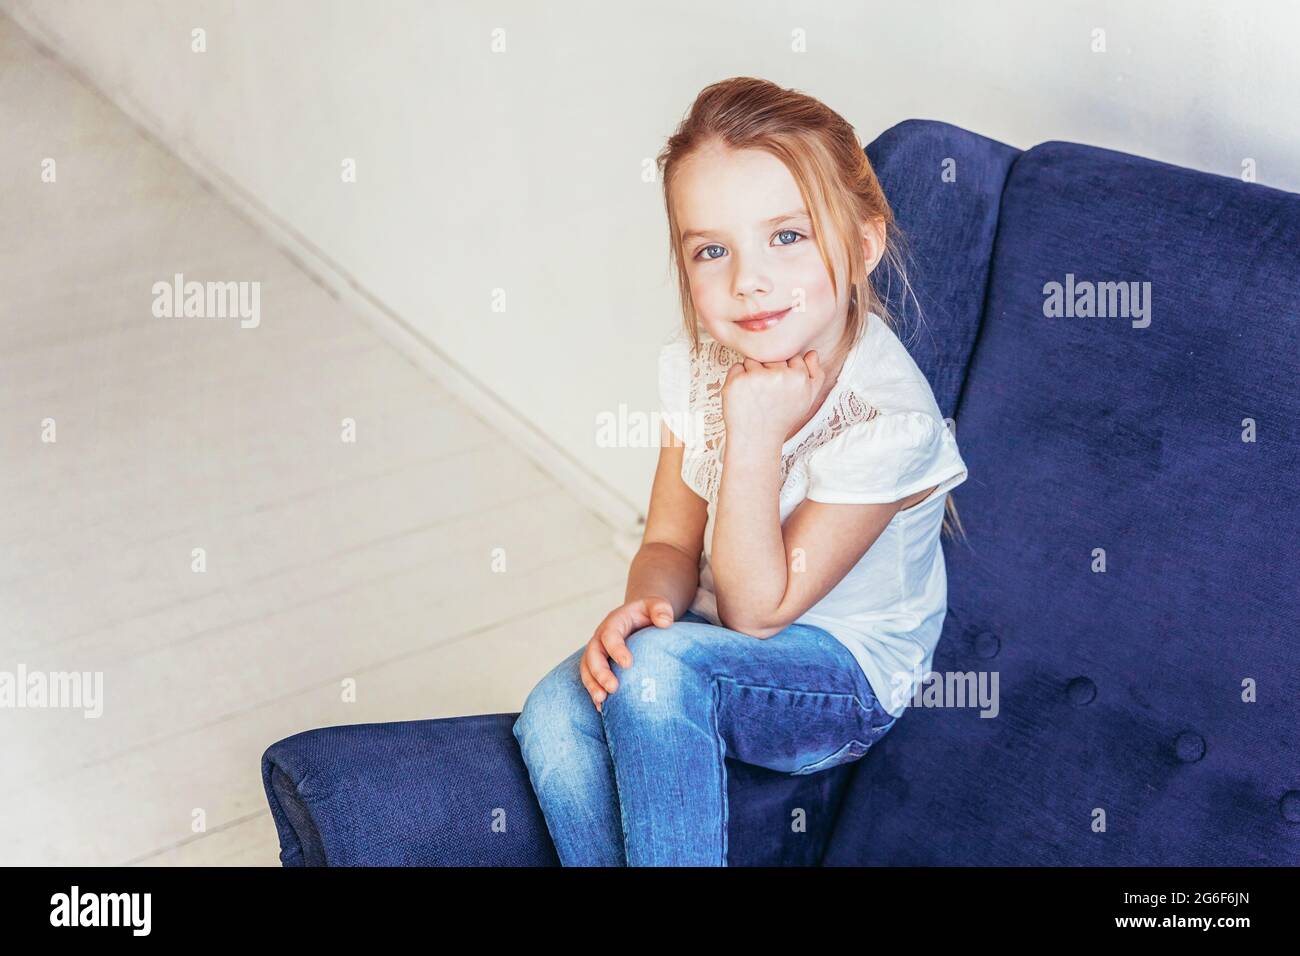 Sweet little girl in jeans and white T-shirt sitting on modern cozy ...